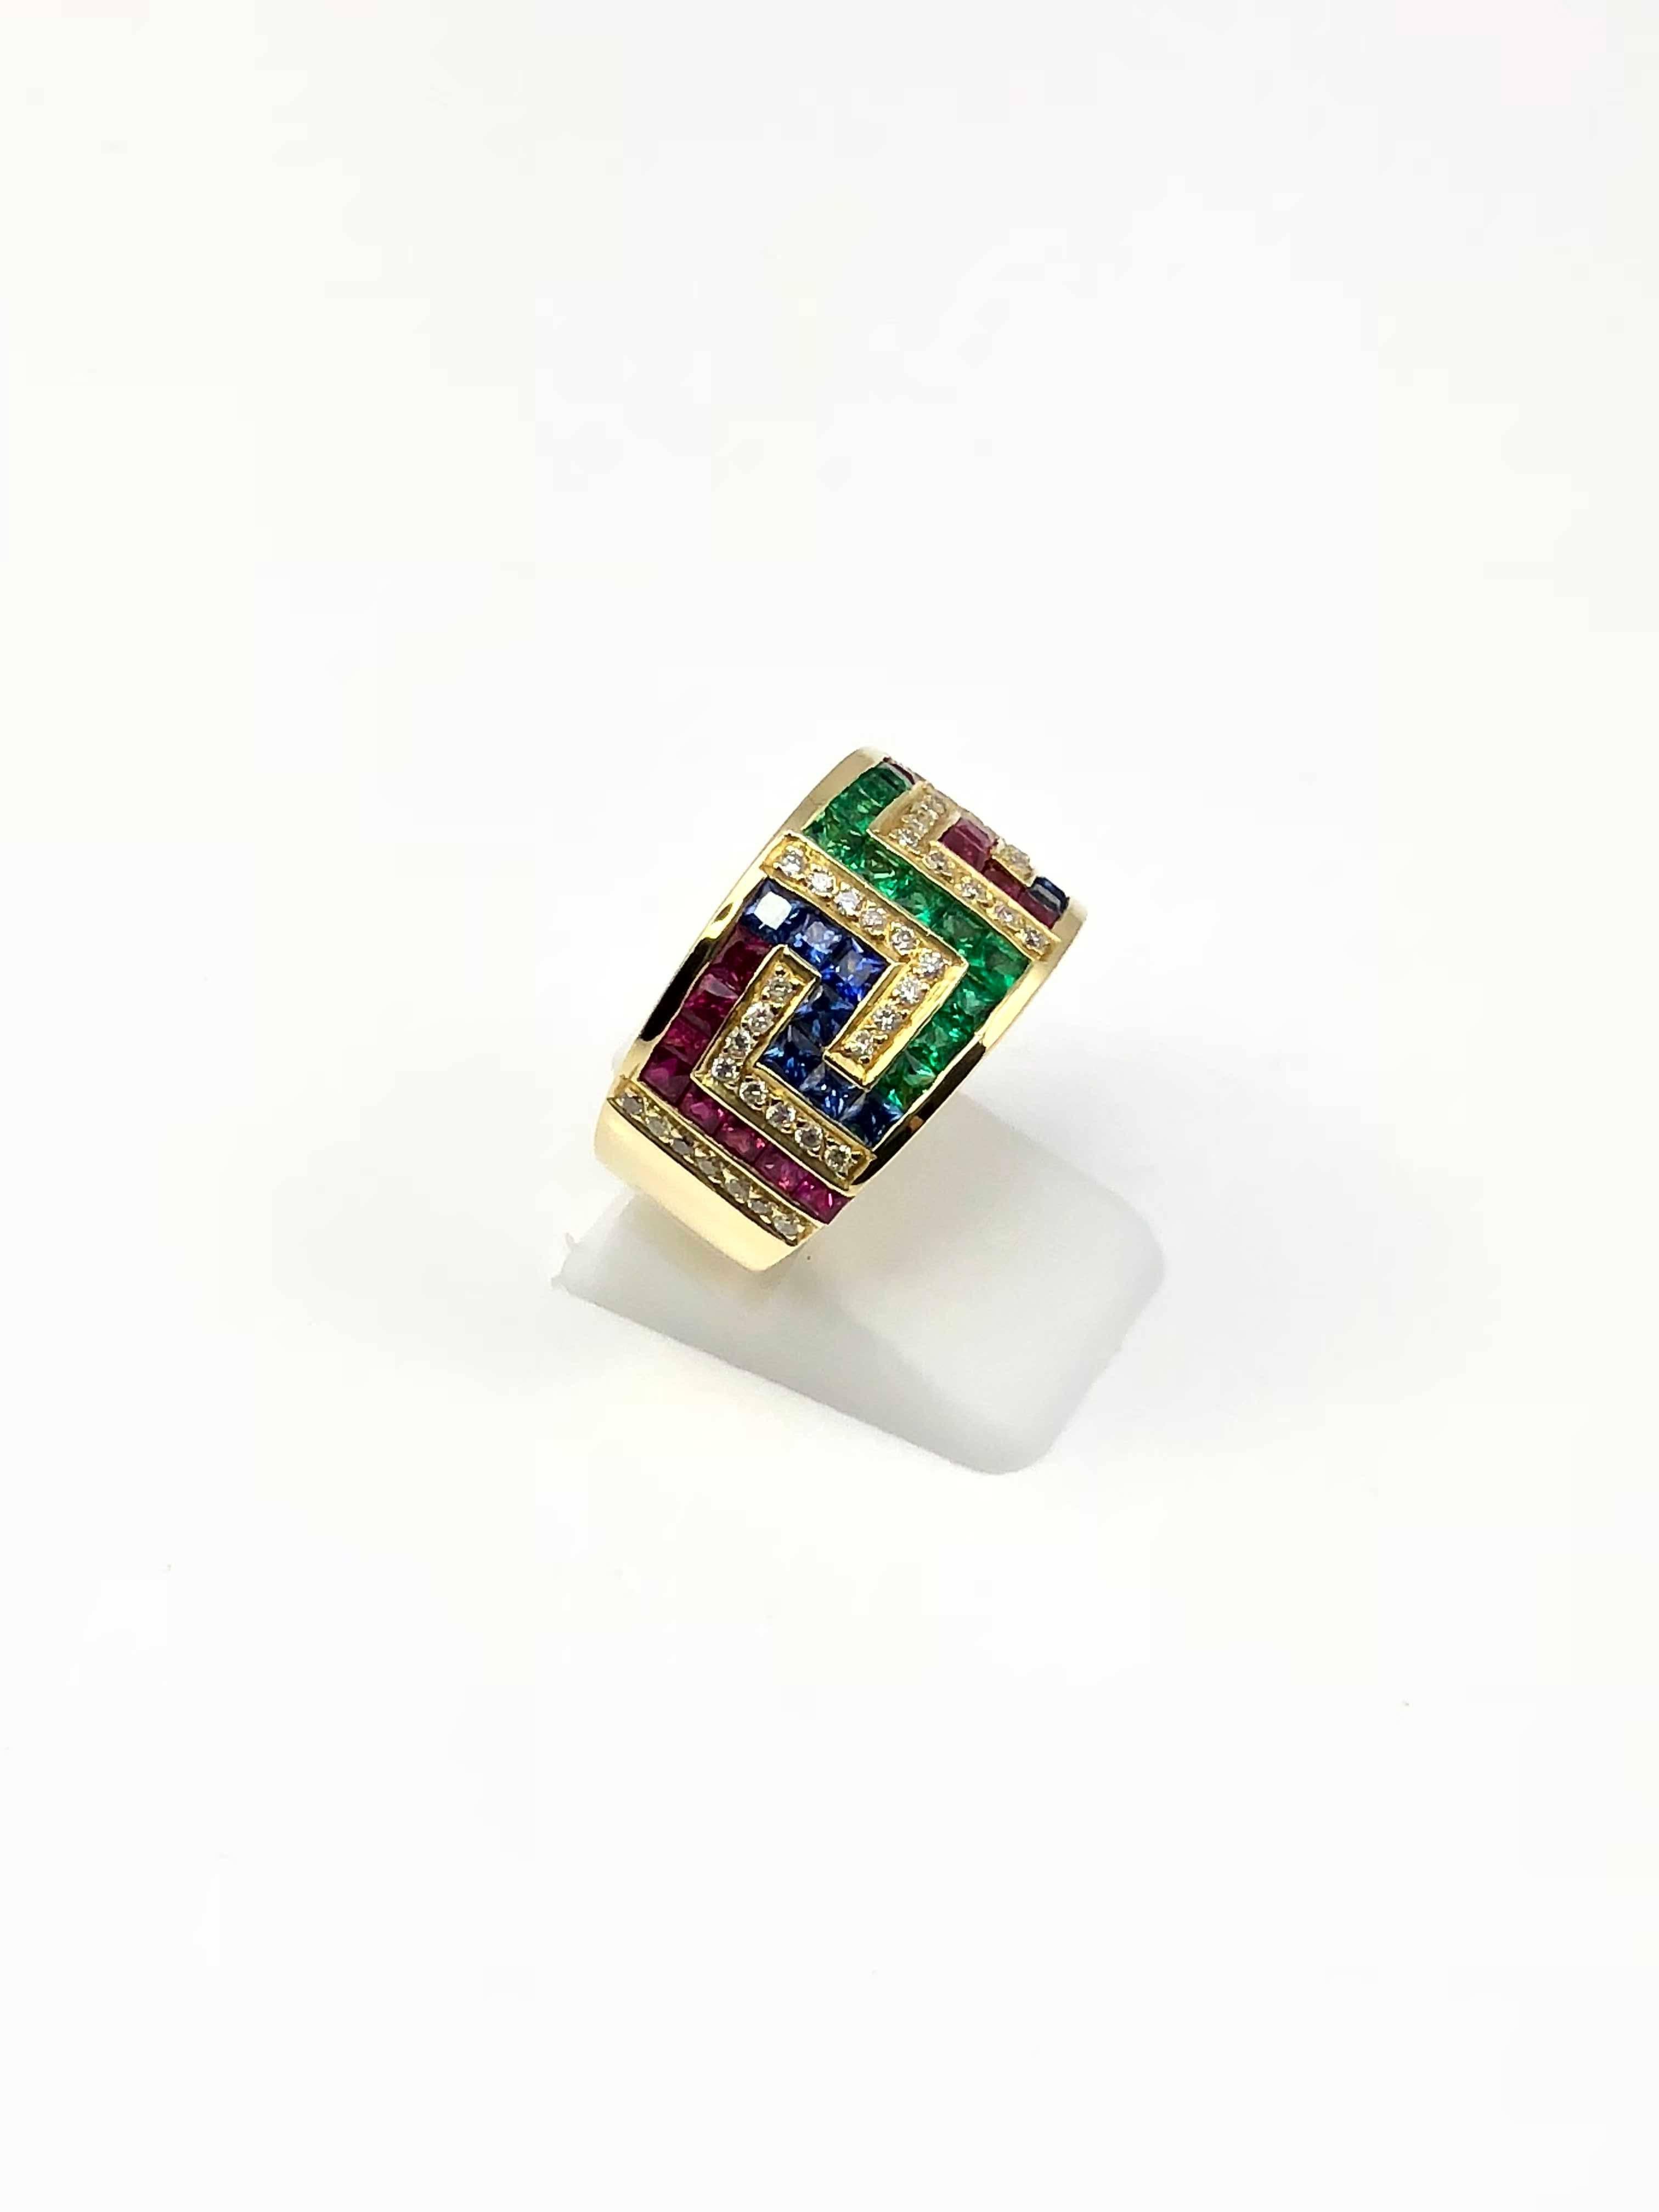 S.Georgios designer 18 Karat Yellow Gold Ring all Hand-Made featuring the Greek Key design symbolizing eternity. This gorgeous band ring features Brilliant Cut White Diamonds total weight of 0.40 Carat, Princess cut Rubies, Sapphires and Emeralds